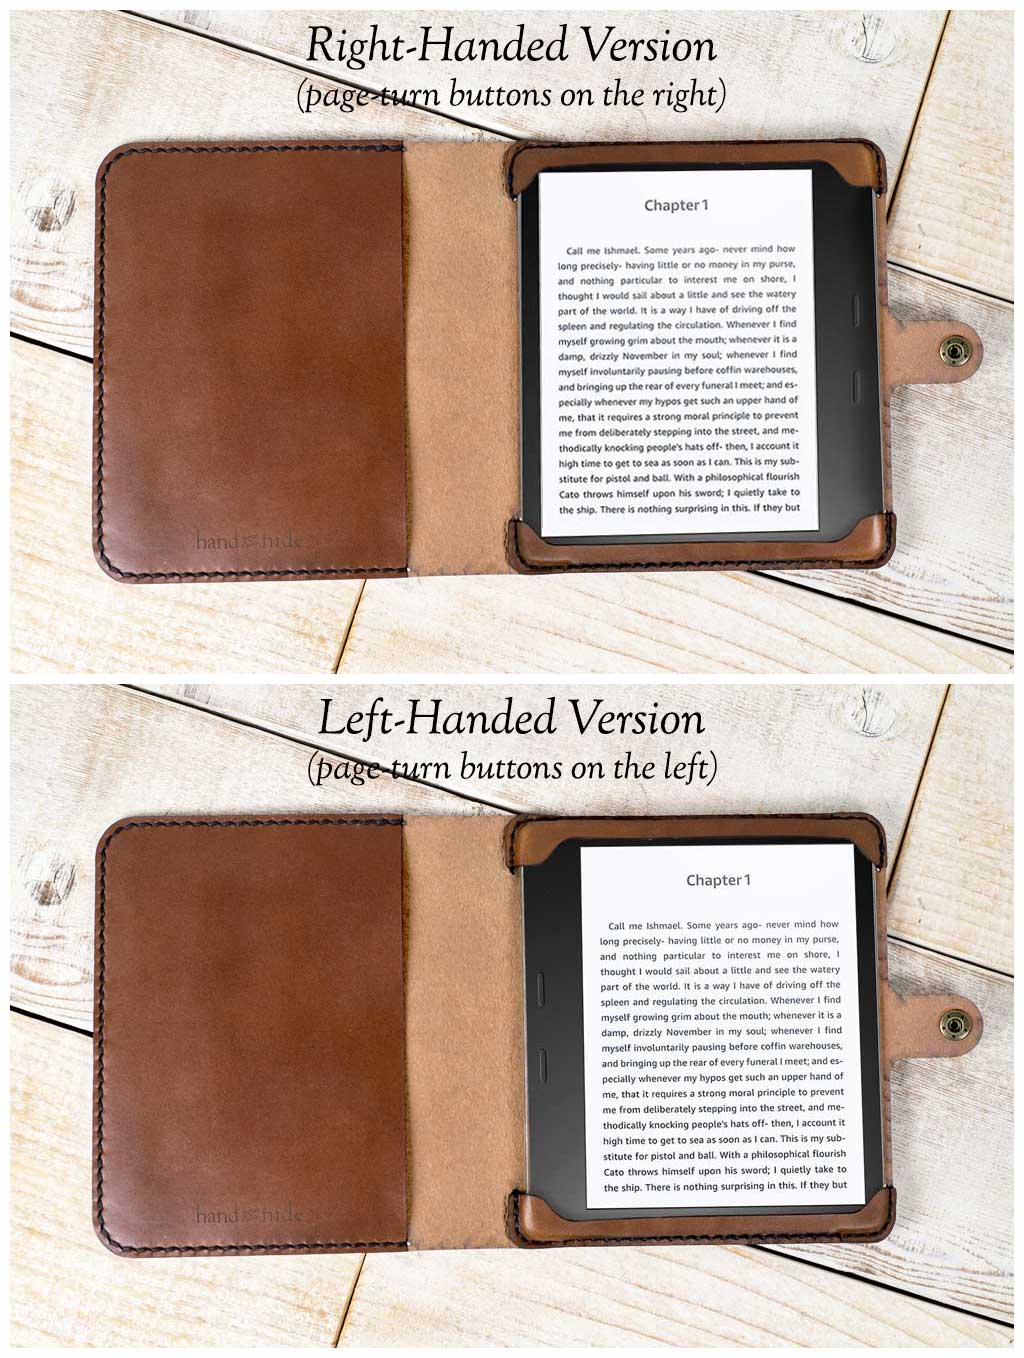 Hand and Hide Leather Tablet Cover for Kobo Libra H20 - Hand and Hide LLC